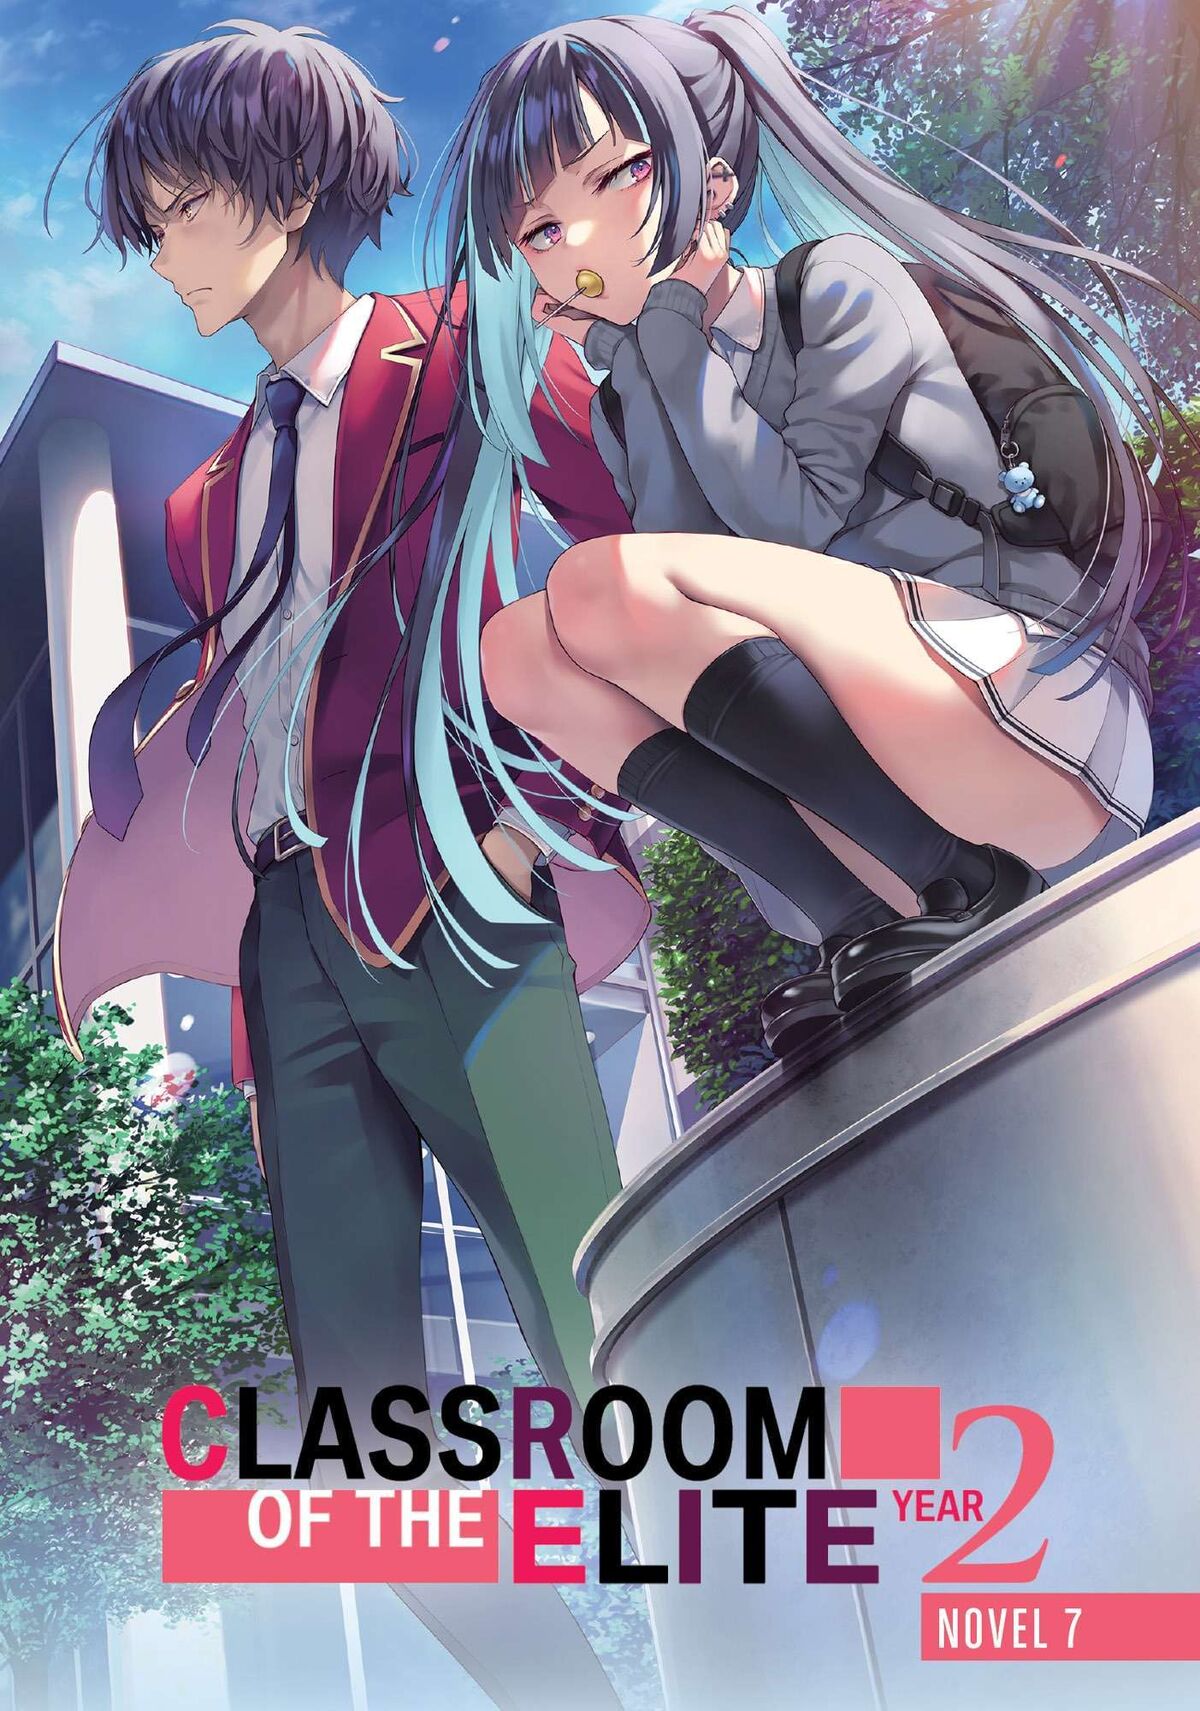 ART] Classroom of the Elite 2nd year Volume 7 will be released on June 24  in Japan : r/LightNovels